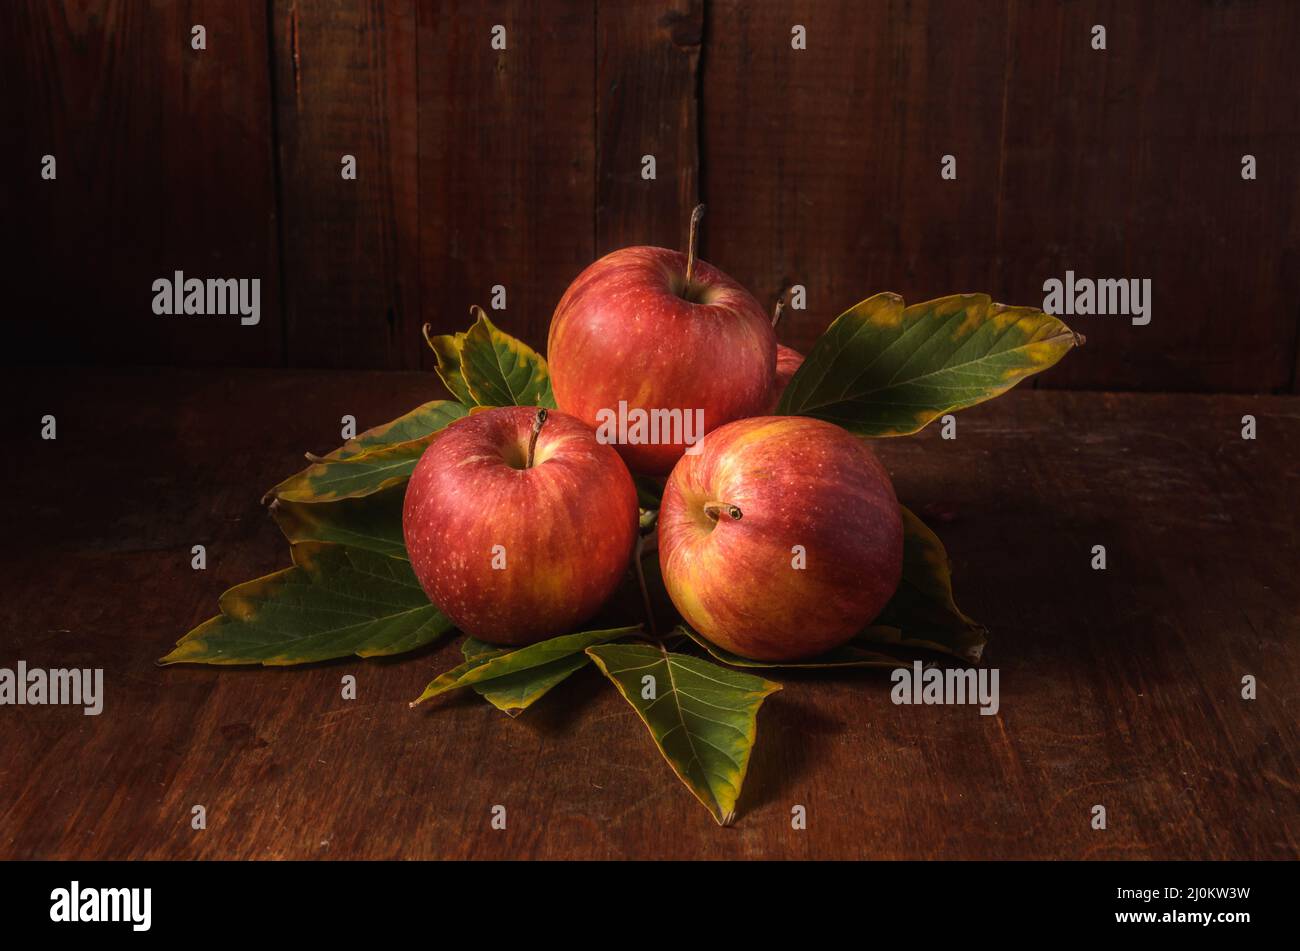 Apples  on a dark wooden background in a rustic style Stock Photo